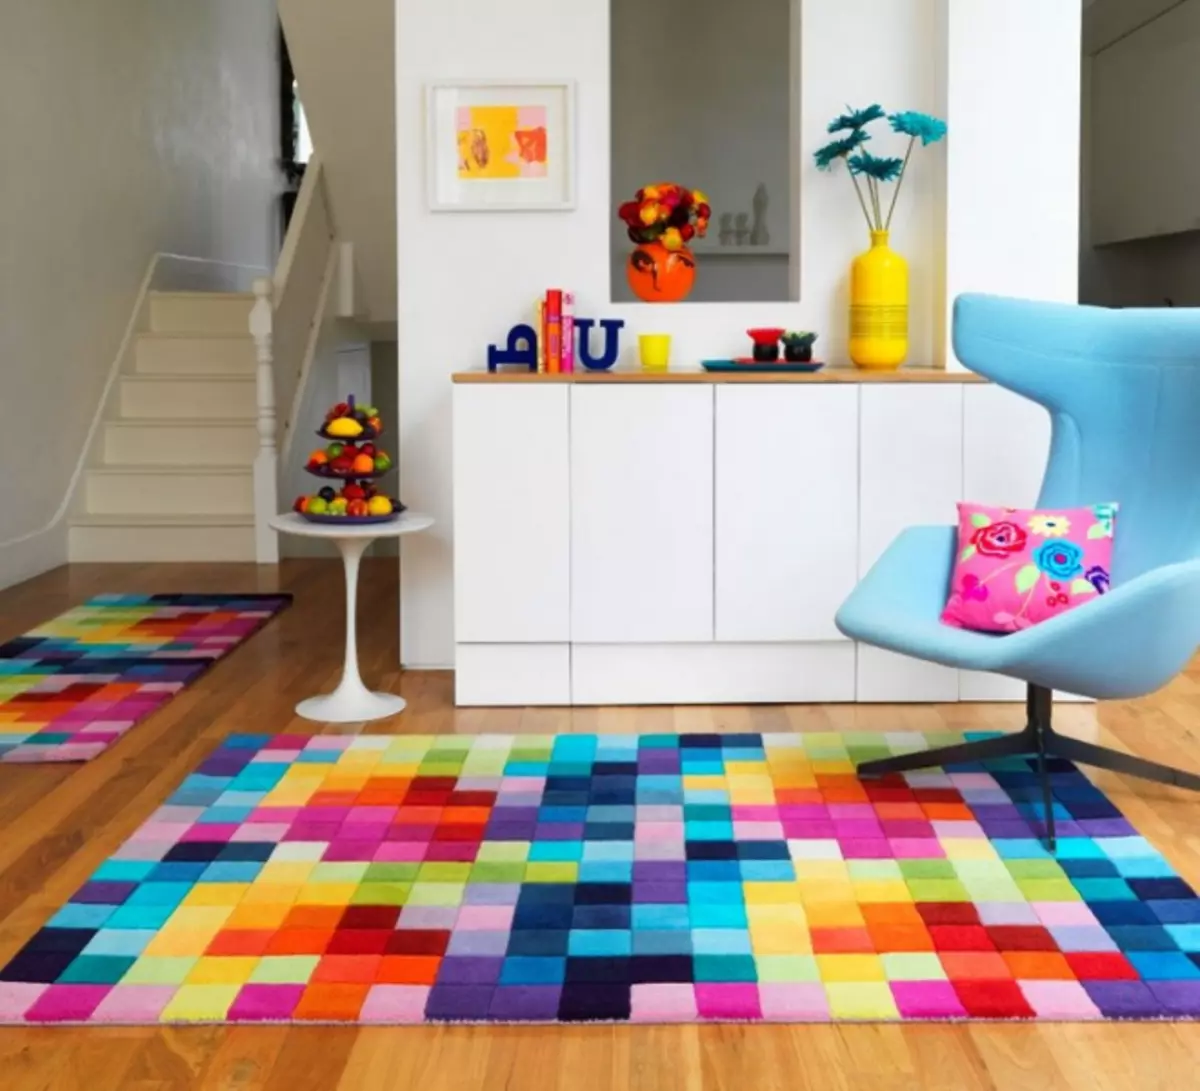 Bright carpet in the interior: how easy and easy to bring paints to your apartment (37 photos)